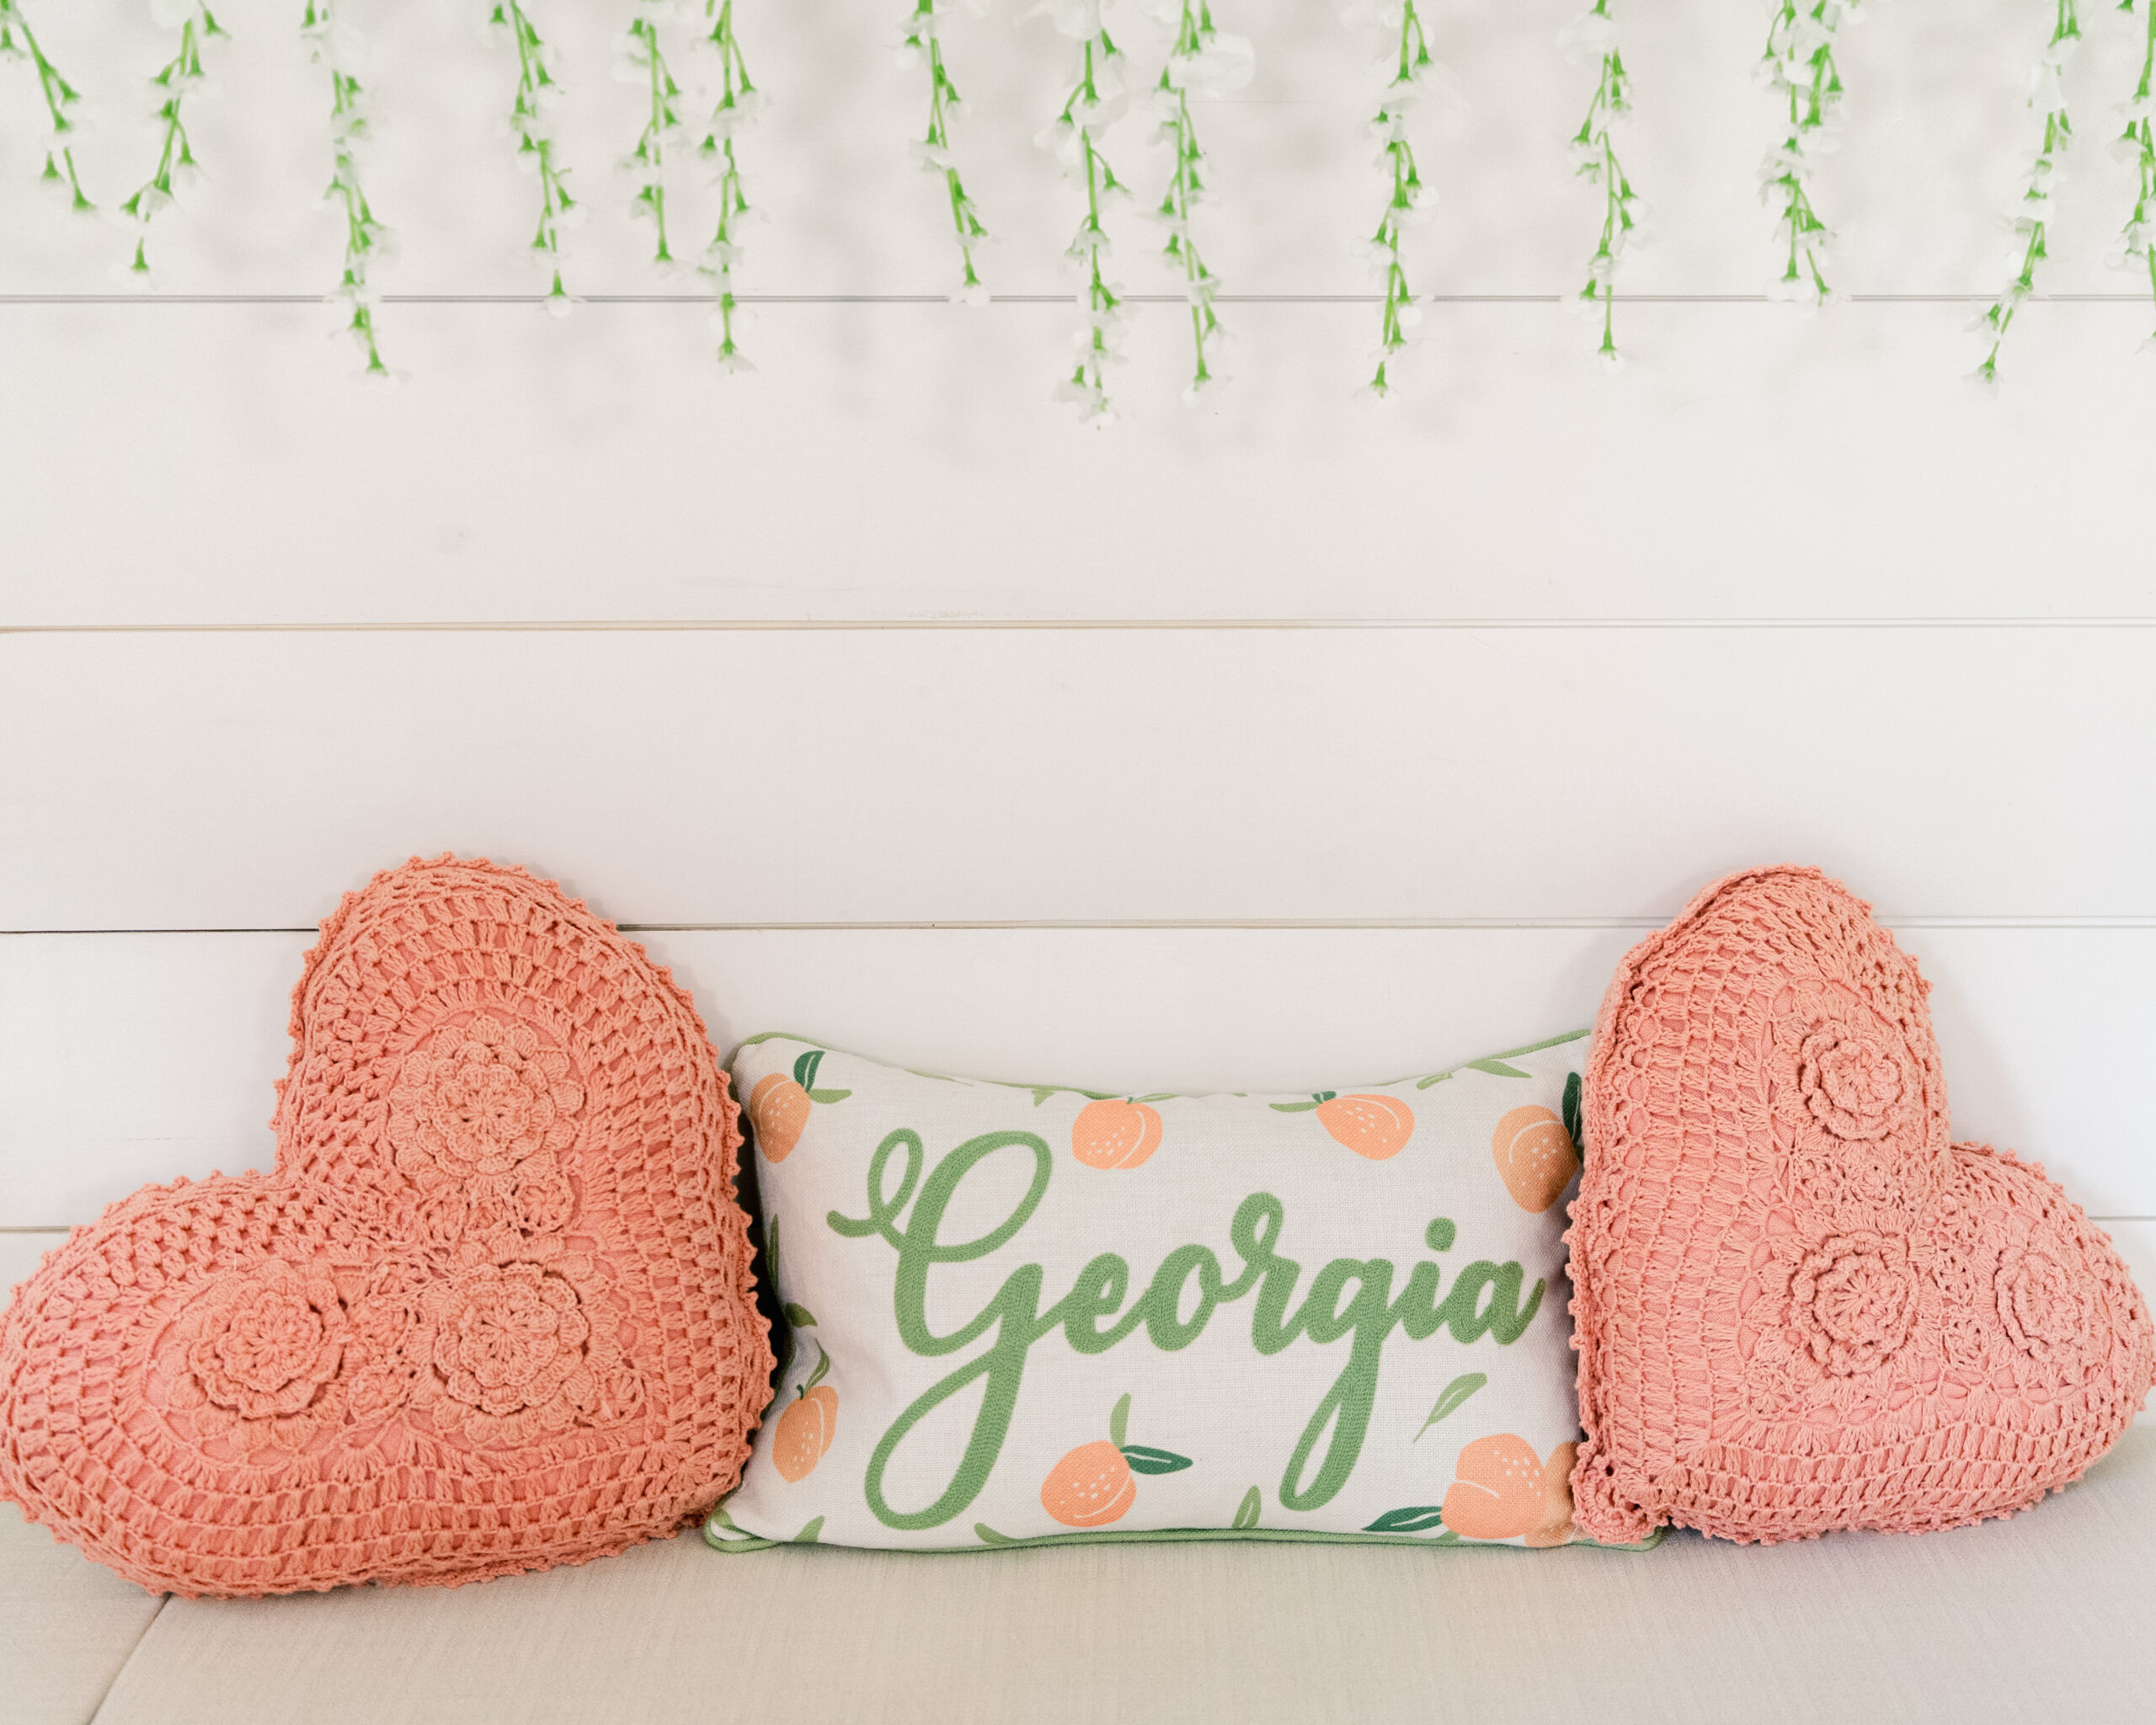 heart shaped pillows and pillow with Georgia written on it